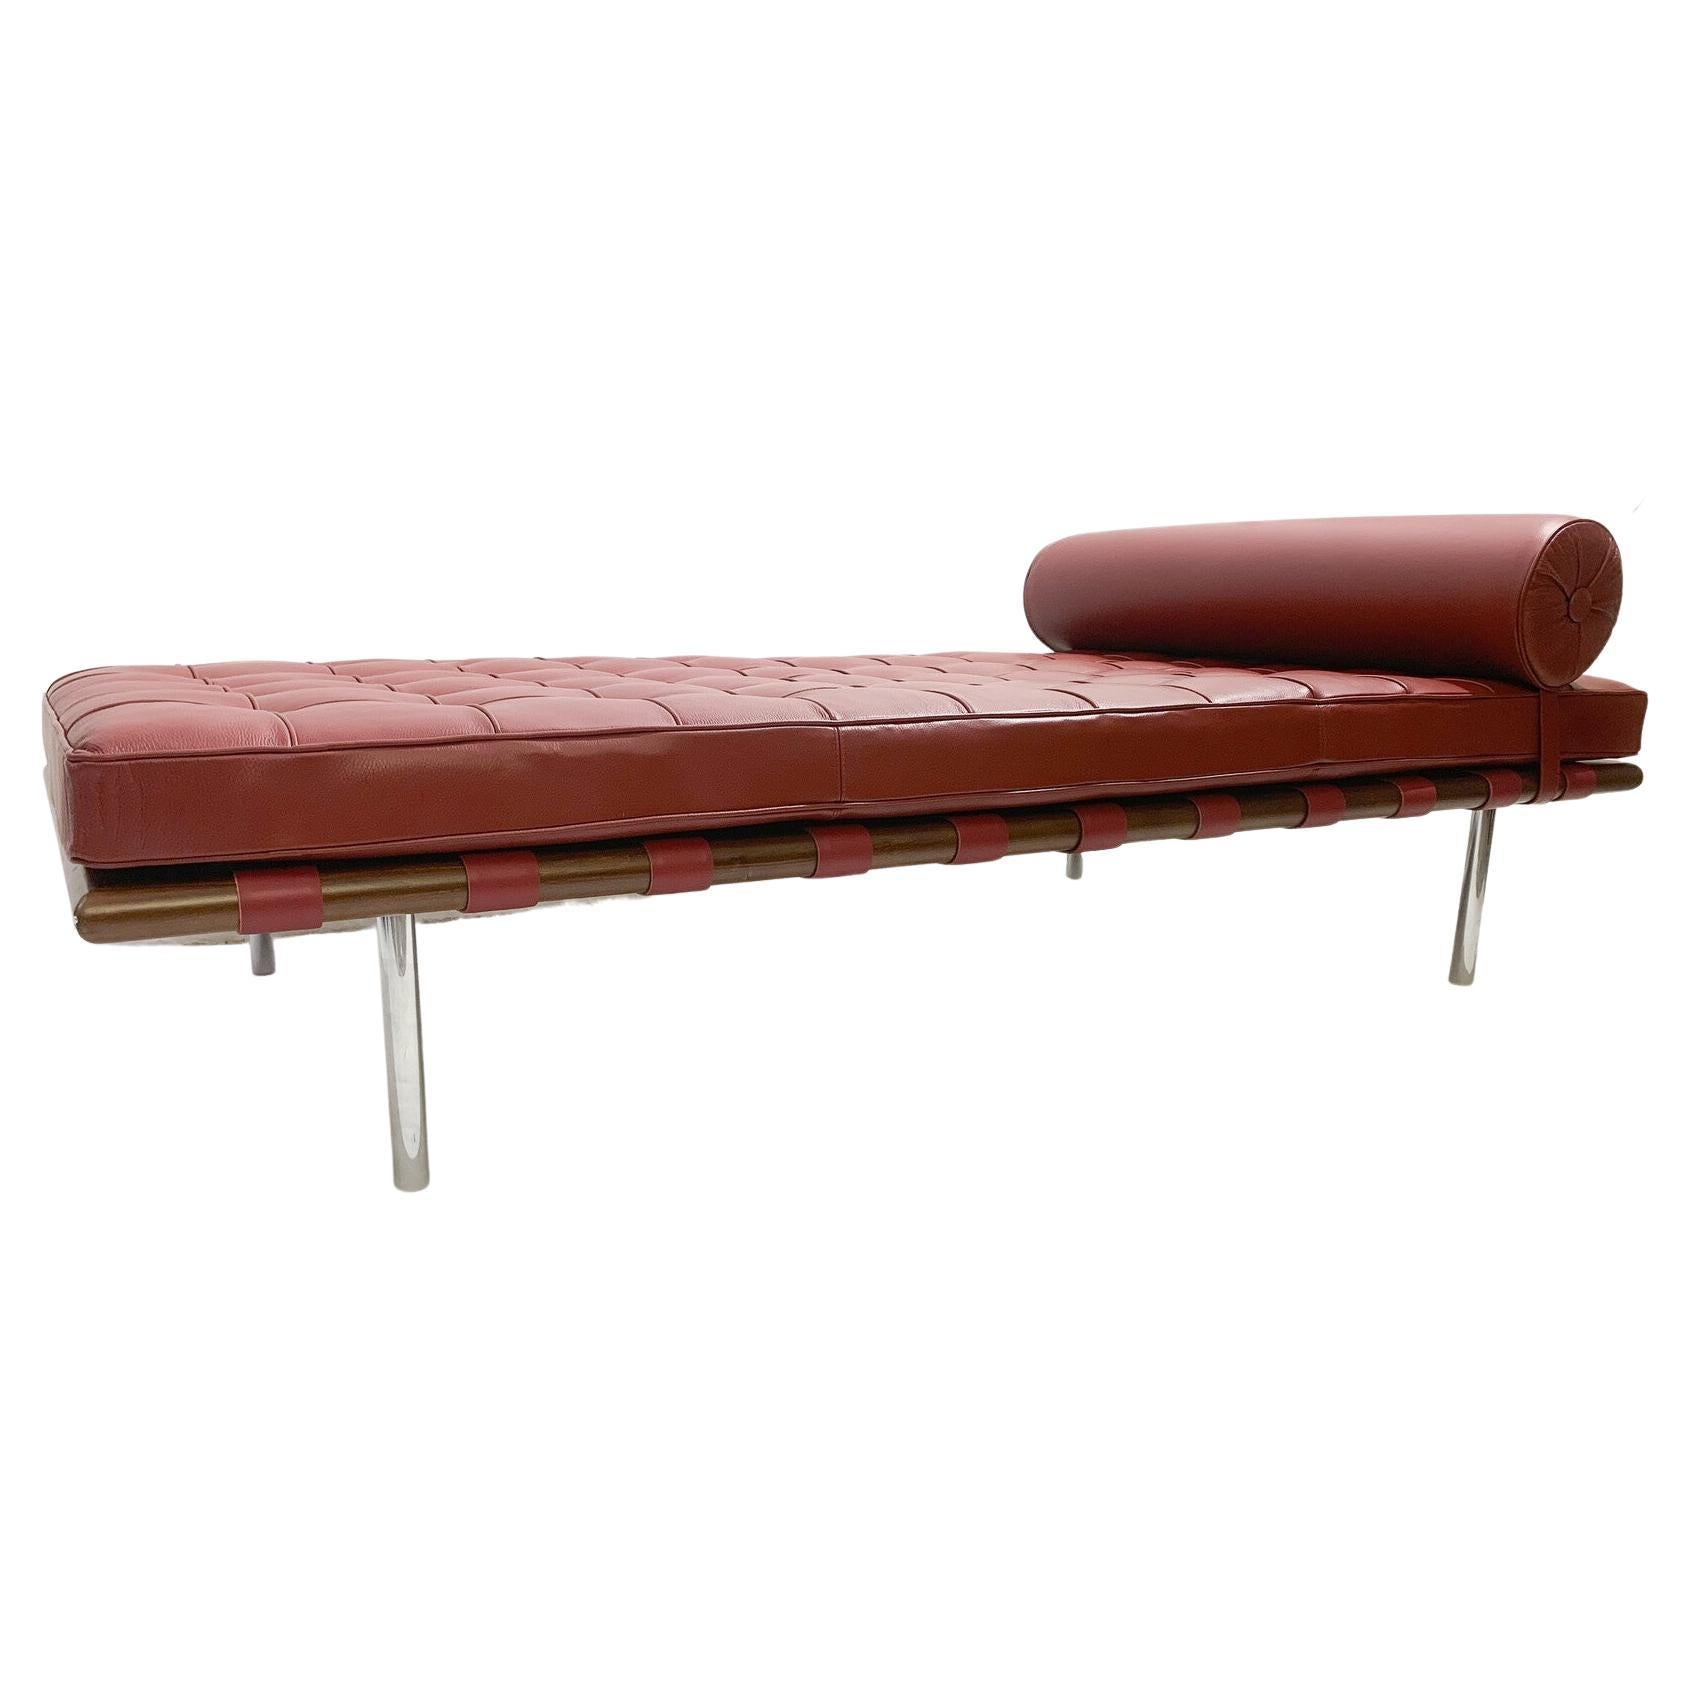 Barcelona Daybed by Ludwig Mies van der Rohe for Knoll, Burgundy Leather, 1990s For Sale